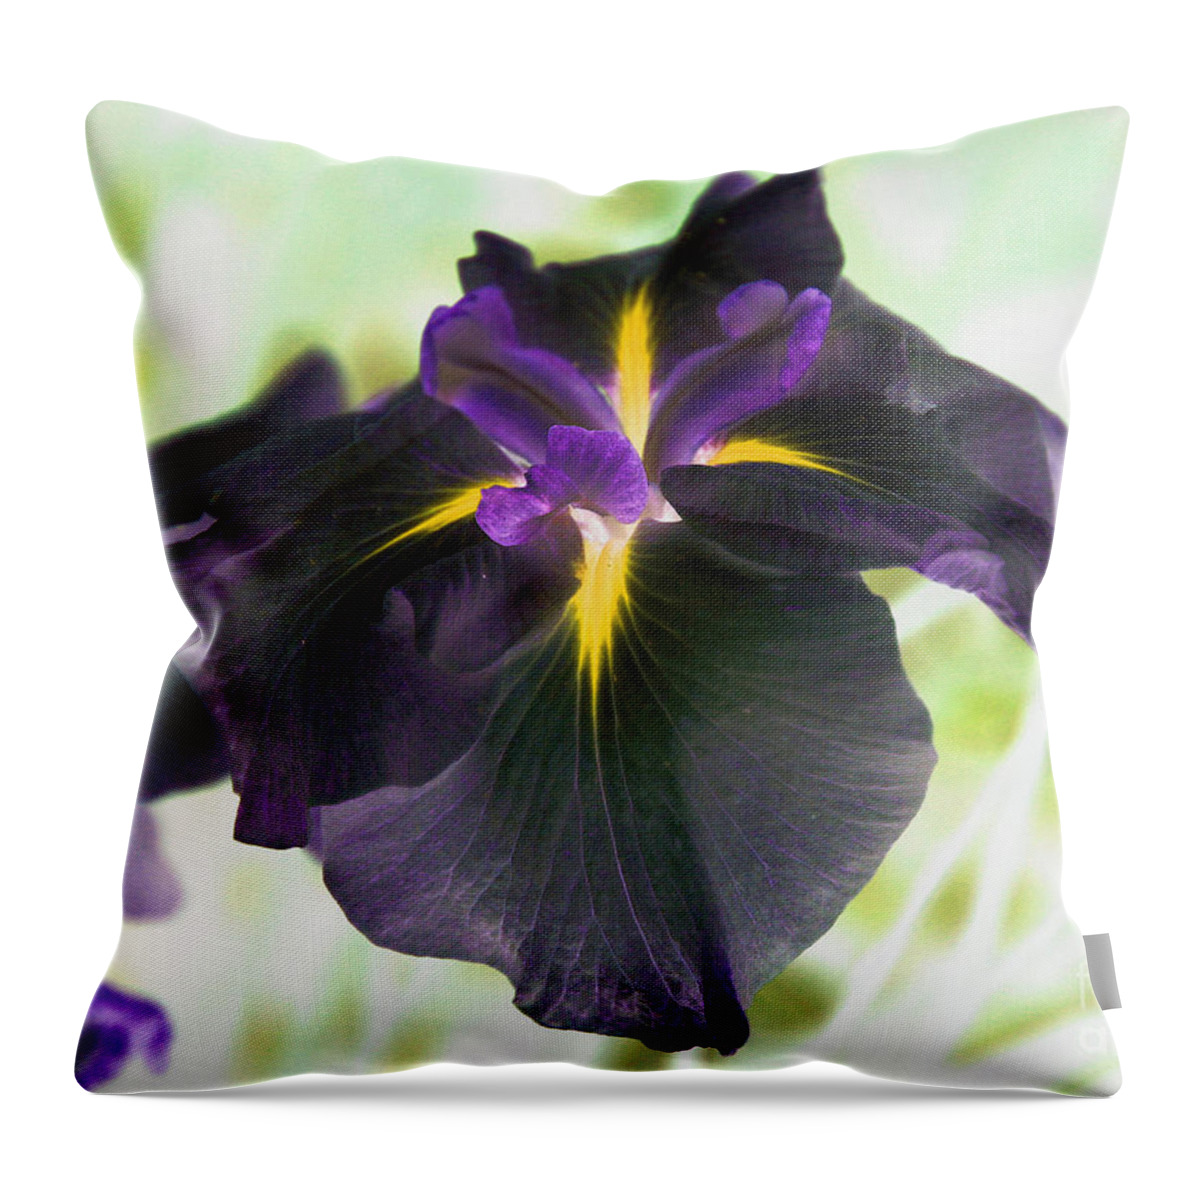 Flower Throw Pillow featuring the photograph Electric Japanese Iris by Smilin Eyes Treasures